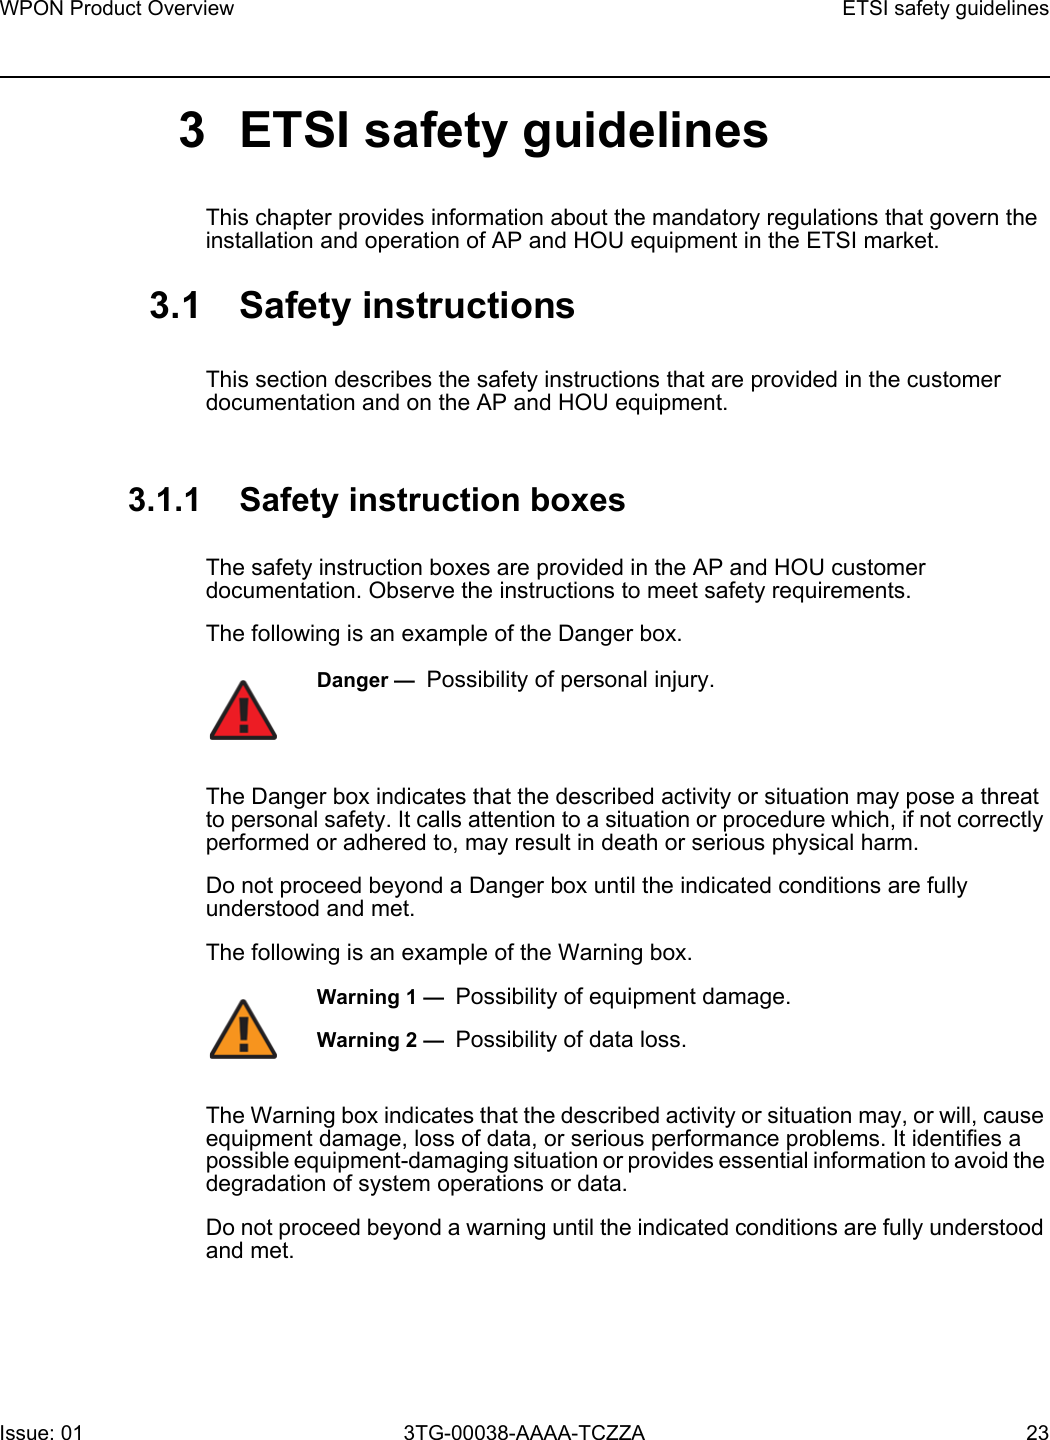 WPON Product Overview ETSI safety guidelinesIssue: 01 3TG-00038-AAAA-TCZZA 23 3 ETSI safety guidelinesThis chapter provides information about the mandatory regulations that govern the installation and operation of AP and HOU equipment in the ETSI market.3.1 Safety instructionsThis section describes the safety instructions that are provided in the customer documentation and on the AP and HOU equipment.3.1.1 Safety instruction boxesThe safety instruction boxes are provided in the AP and HOU customer documentation. Observe the instructions to meet safety requirements.The following is an example of the Danger box.The Danger box indicates that the described activity or situation may pose a threat to personal safety. It calls attention to a situation or procedure which, if not correctly performed or adhered to, may result in death or serious physical harm. Do not proceed beyond a Danger box until the indicated conditions are fully understood and met.The following is an example of the Warning box.The Warning box indicates that the described activity or situation may, or will, cause equipment damage, loss of data, or serious performance problems. It identifies a possible equipment-damaging situation or provides essential information to avoid the degradation of system operations or data.Do not proceed beyond a warning until the indicated conditions are fully understood and met.Danger —  Possibility of personal injury. Warning 1 —  Possibility of equipment damage.Warning 2 —  Possibility of data loss.